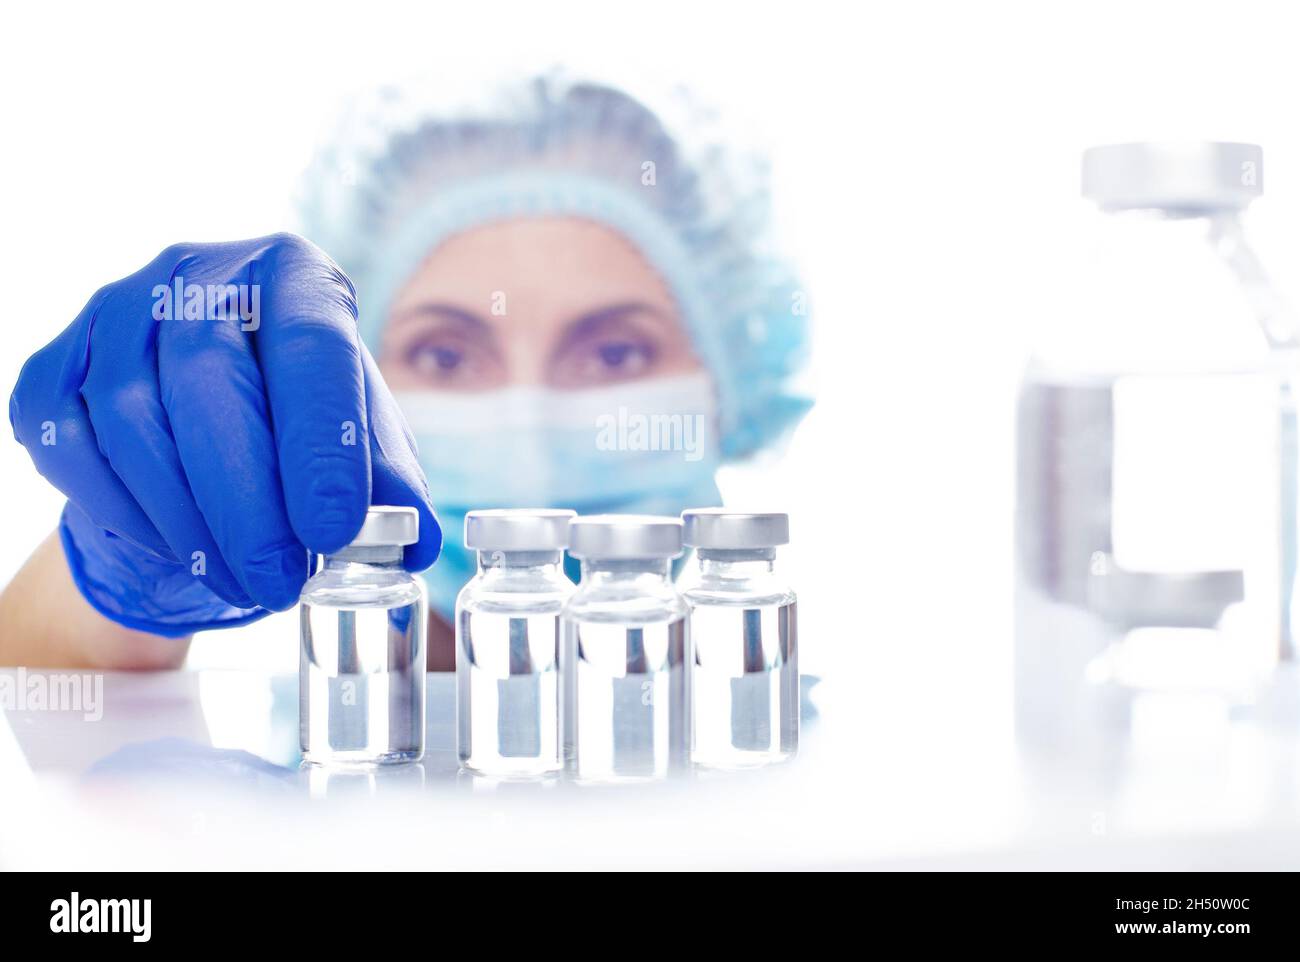 Female nurse in safety mask and gloves takes vial with liquid medicine from refrigerator shelf Stock Photo